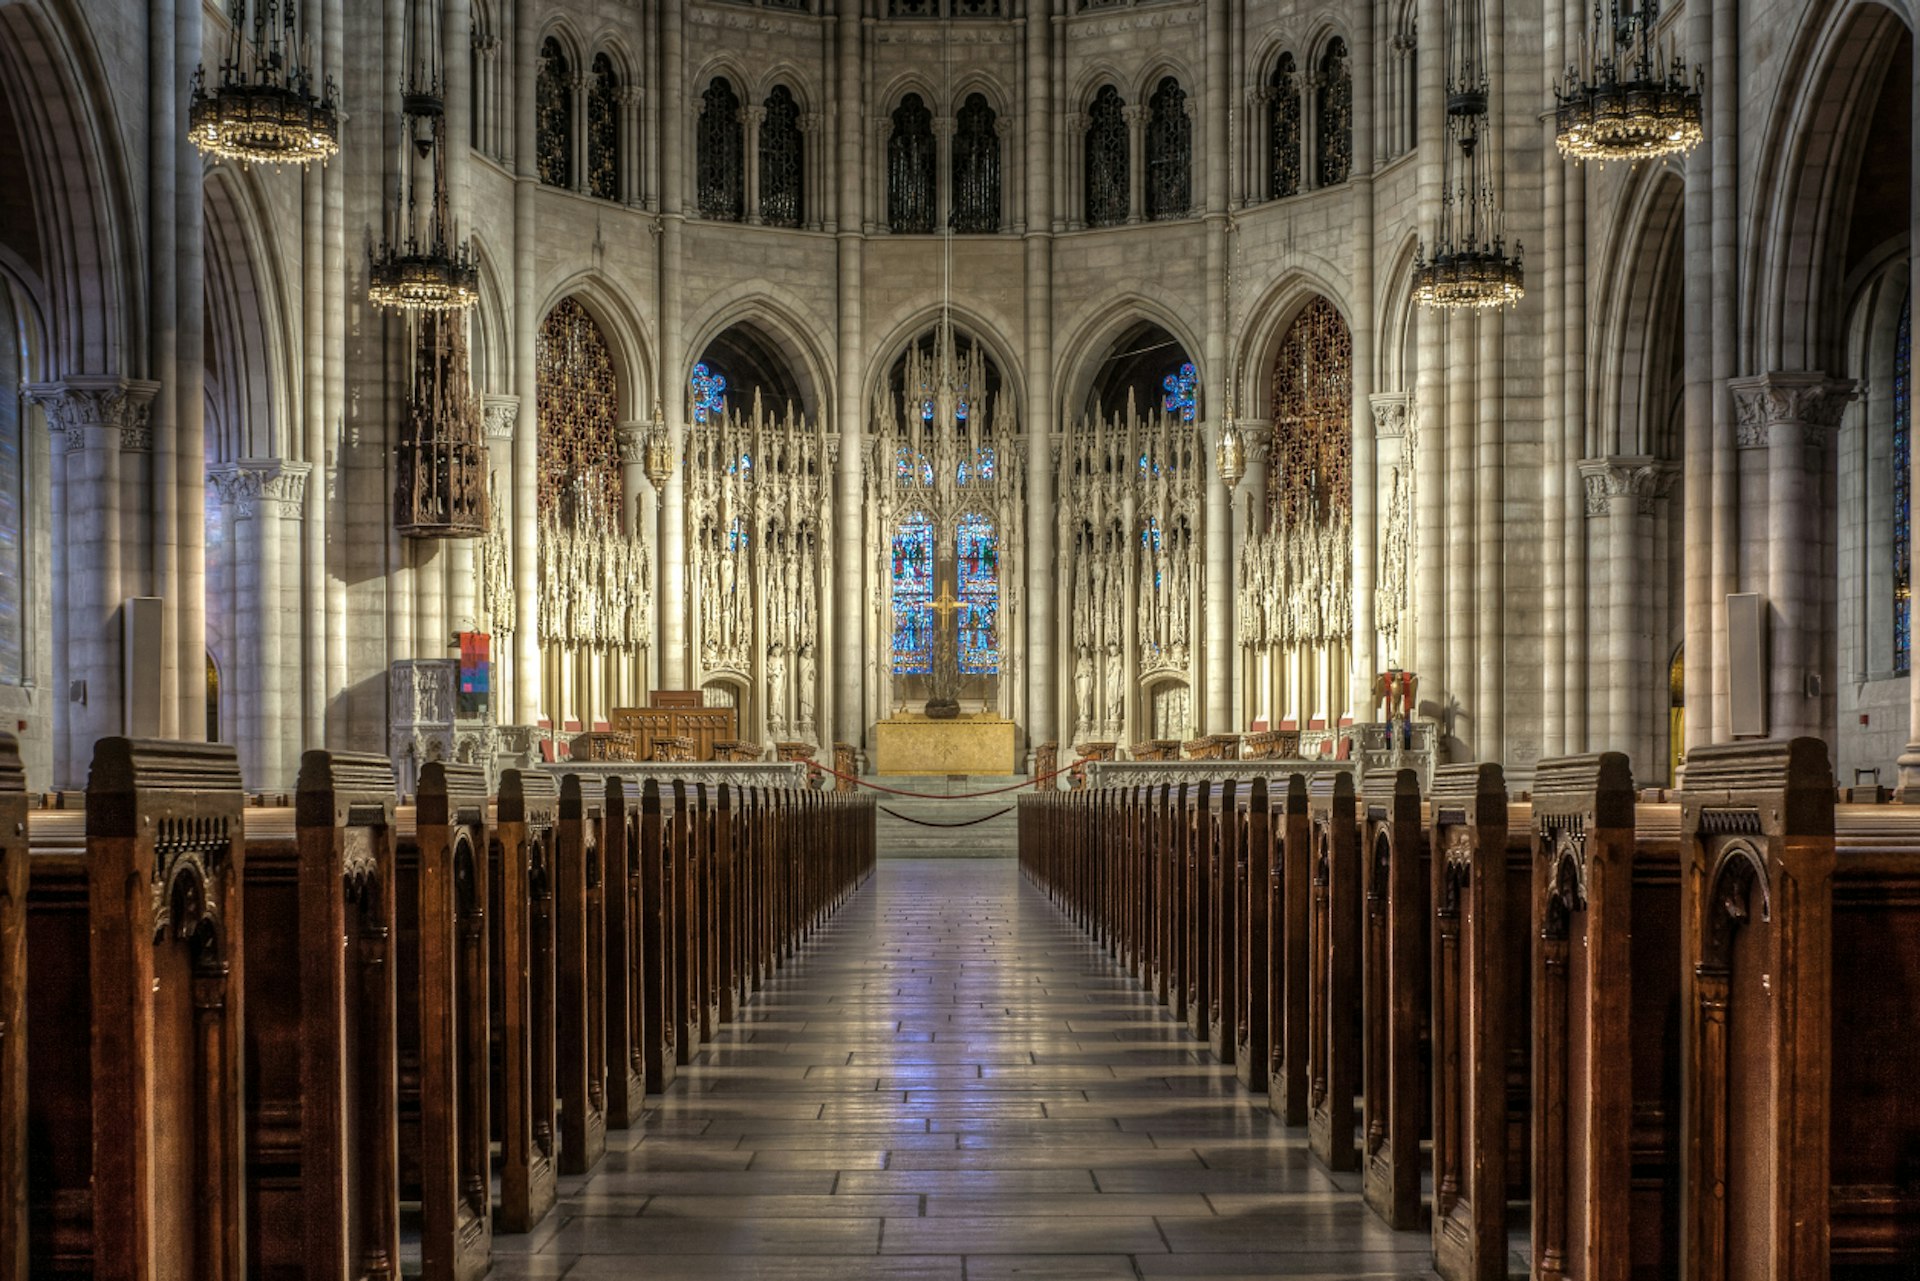 Sun and stained glass inside Riverside Church. Image by Towfiq Ahmed Photography / Moment / Getty Images